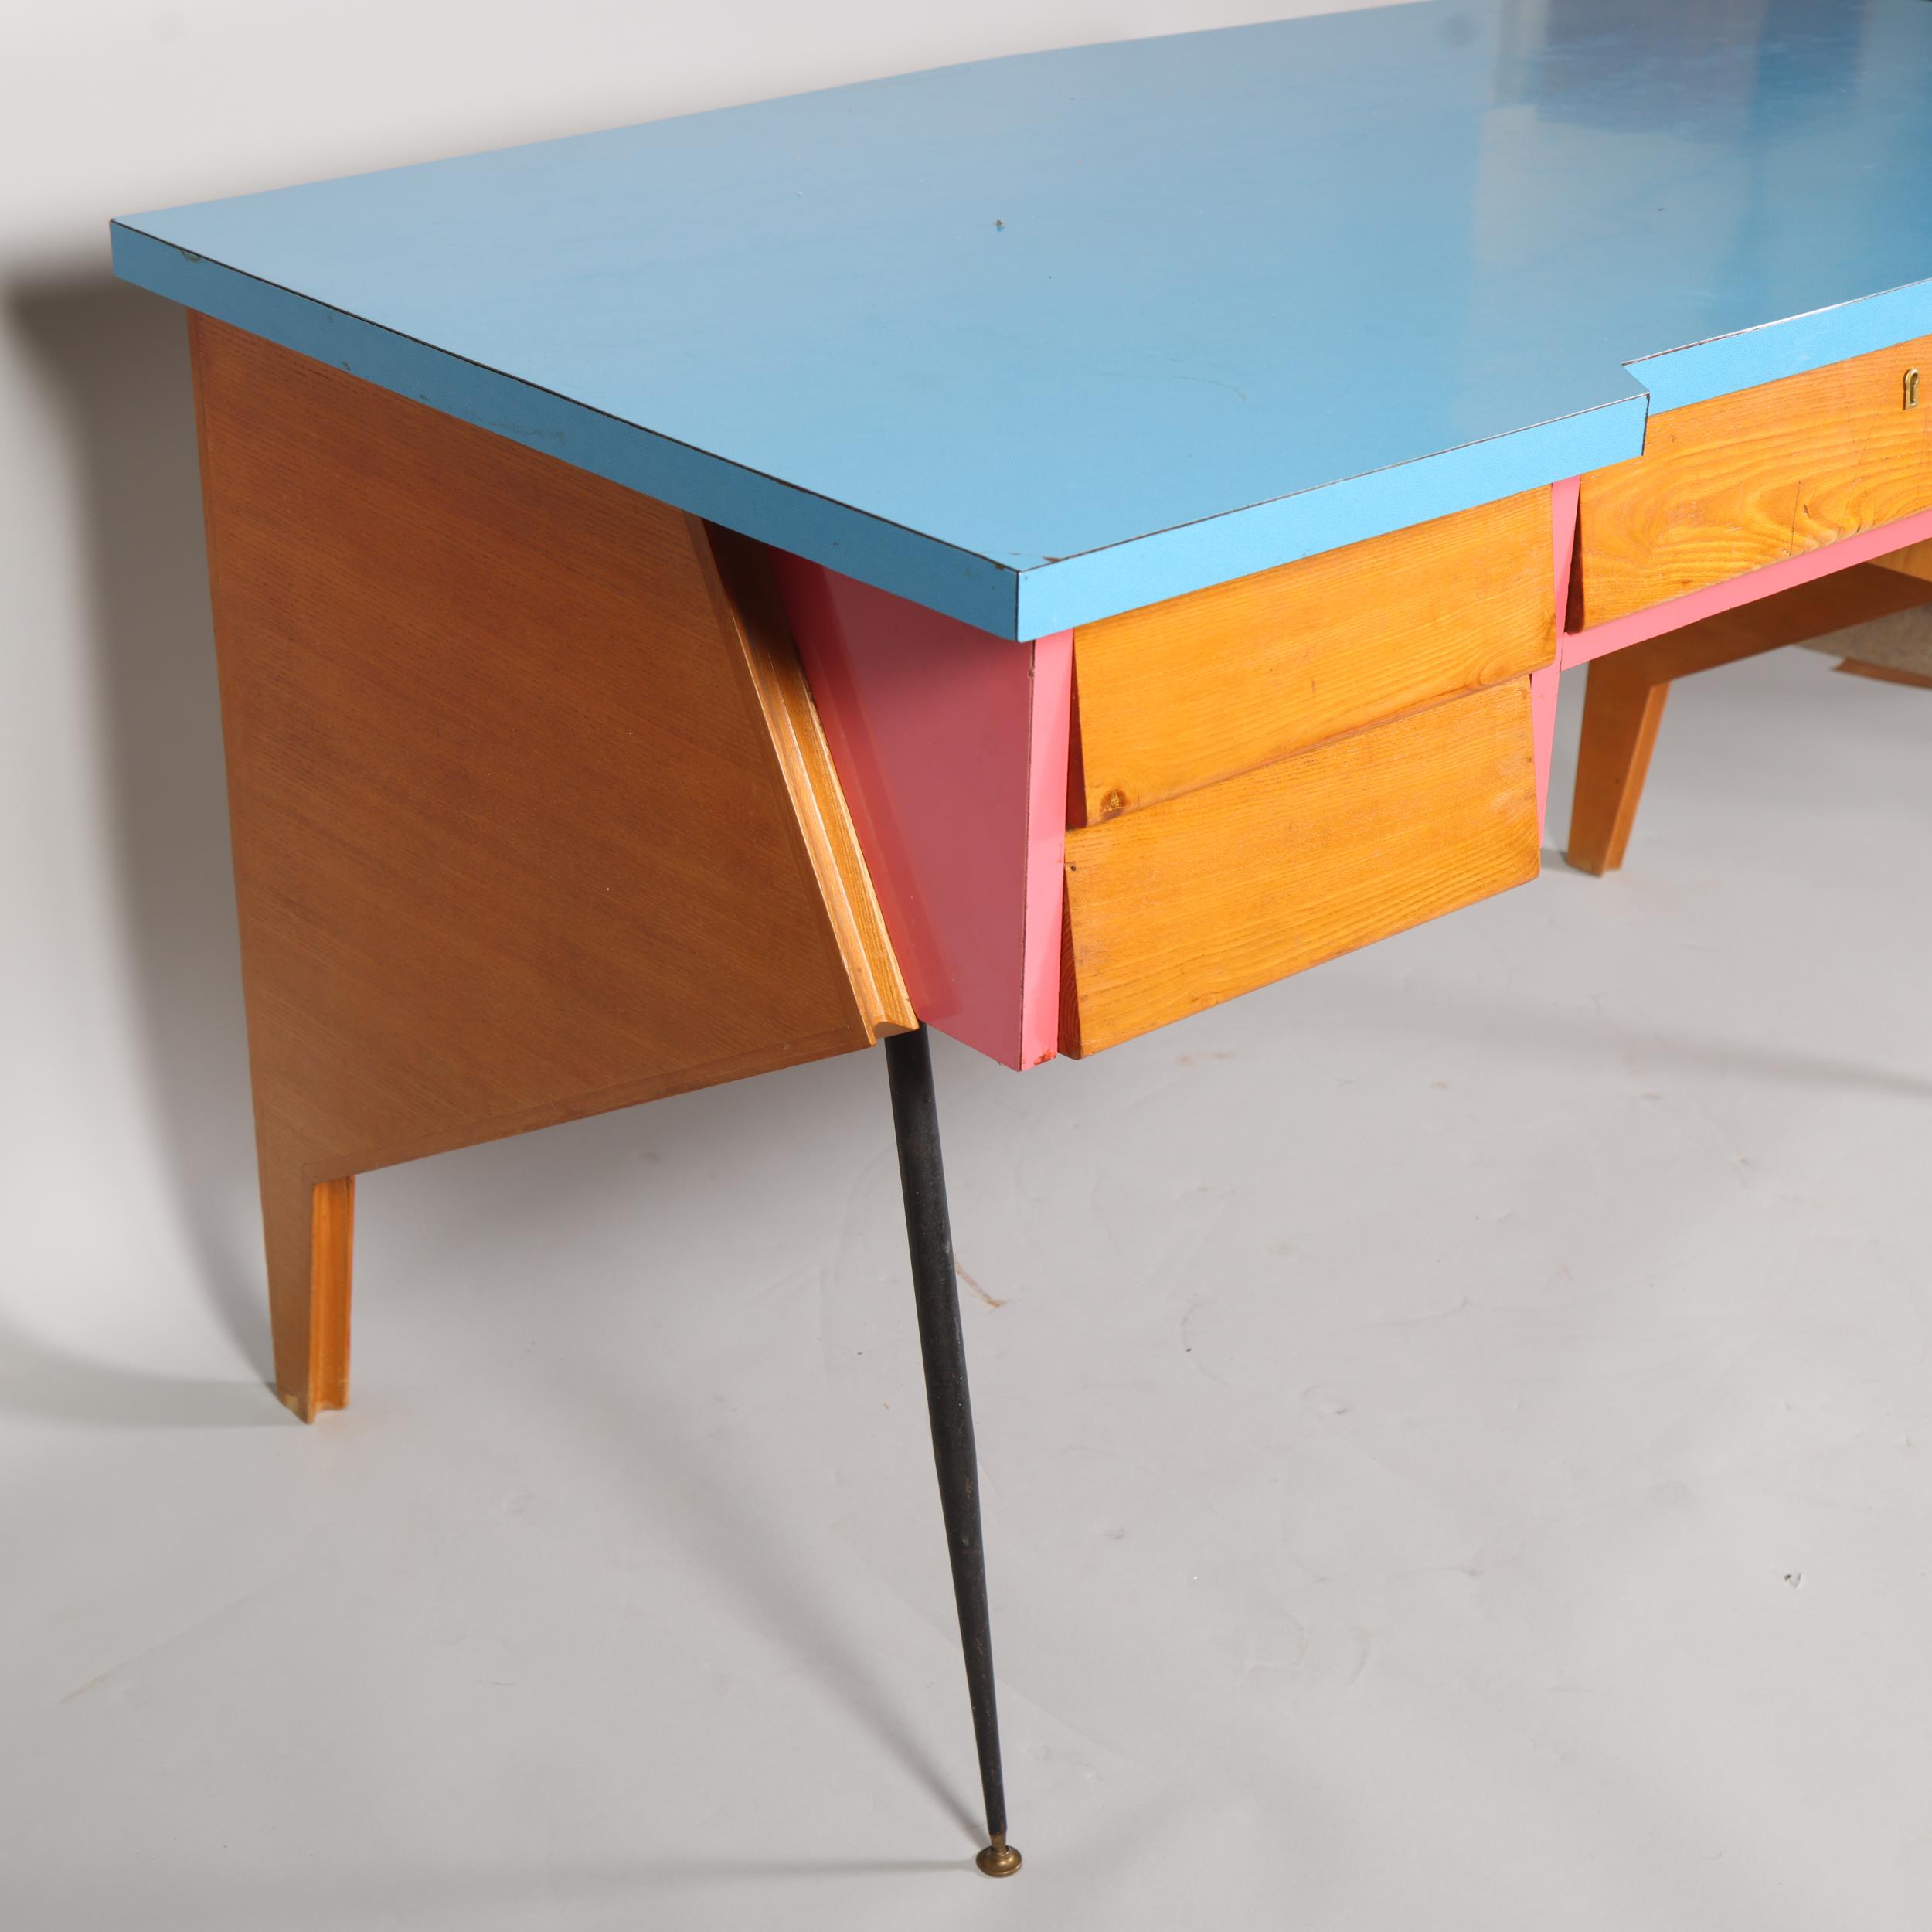 A mid 20th century Thonet desk, with beech ply body, pine fronted drawers with solid beech interior, - Image 3 of 7